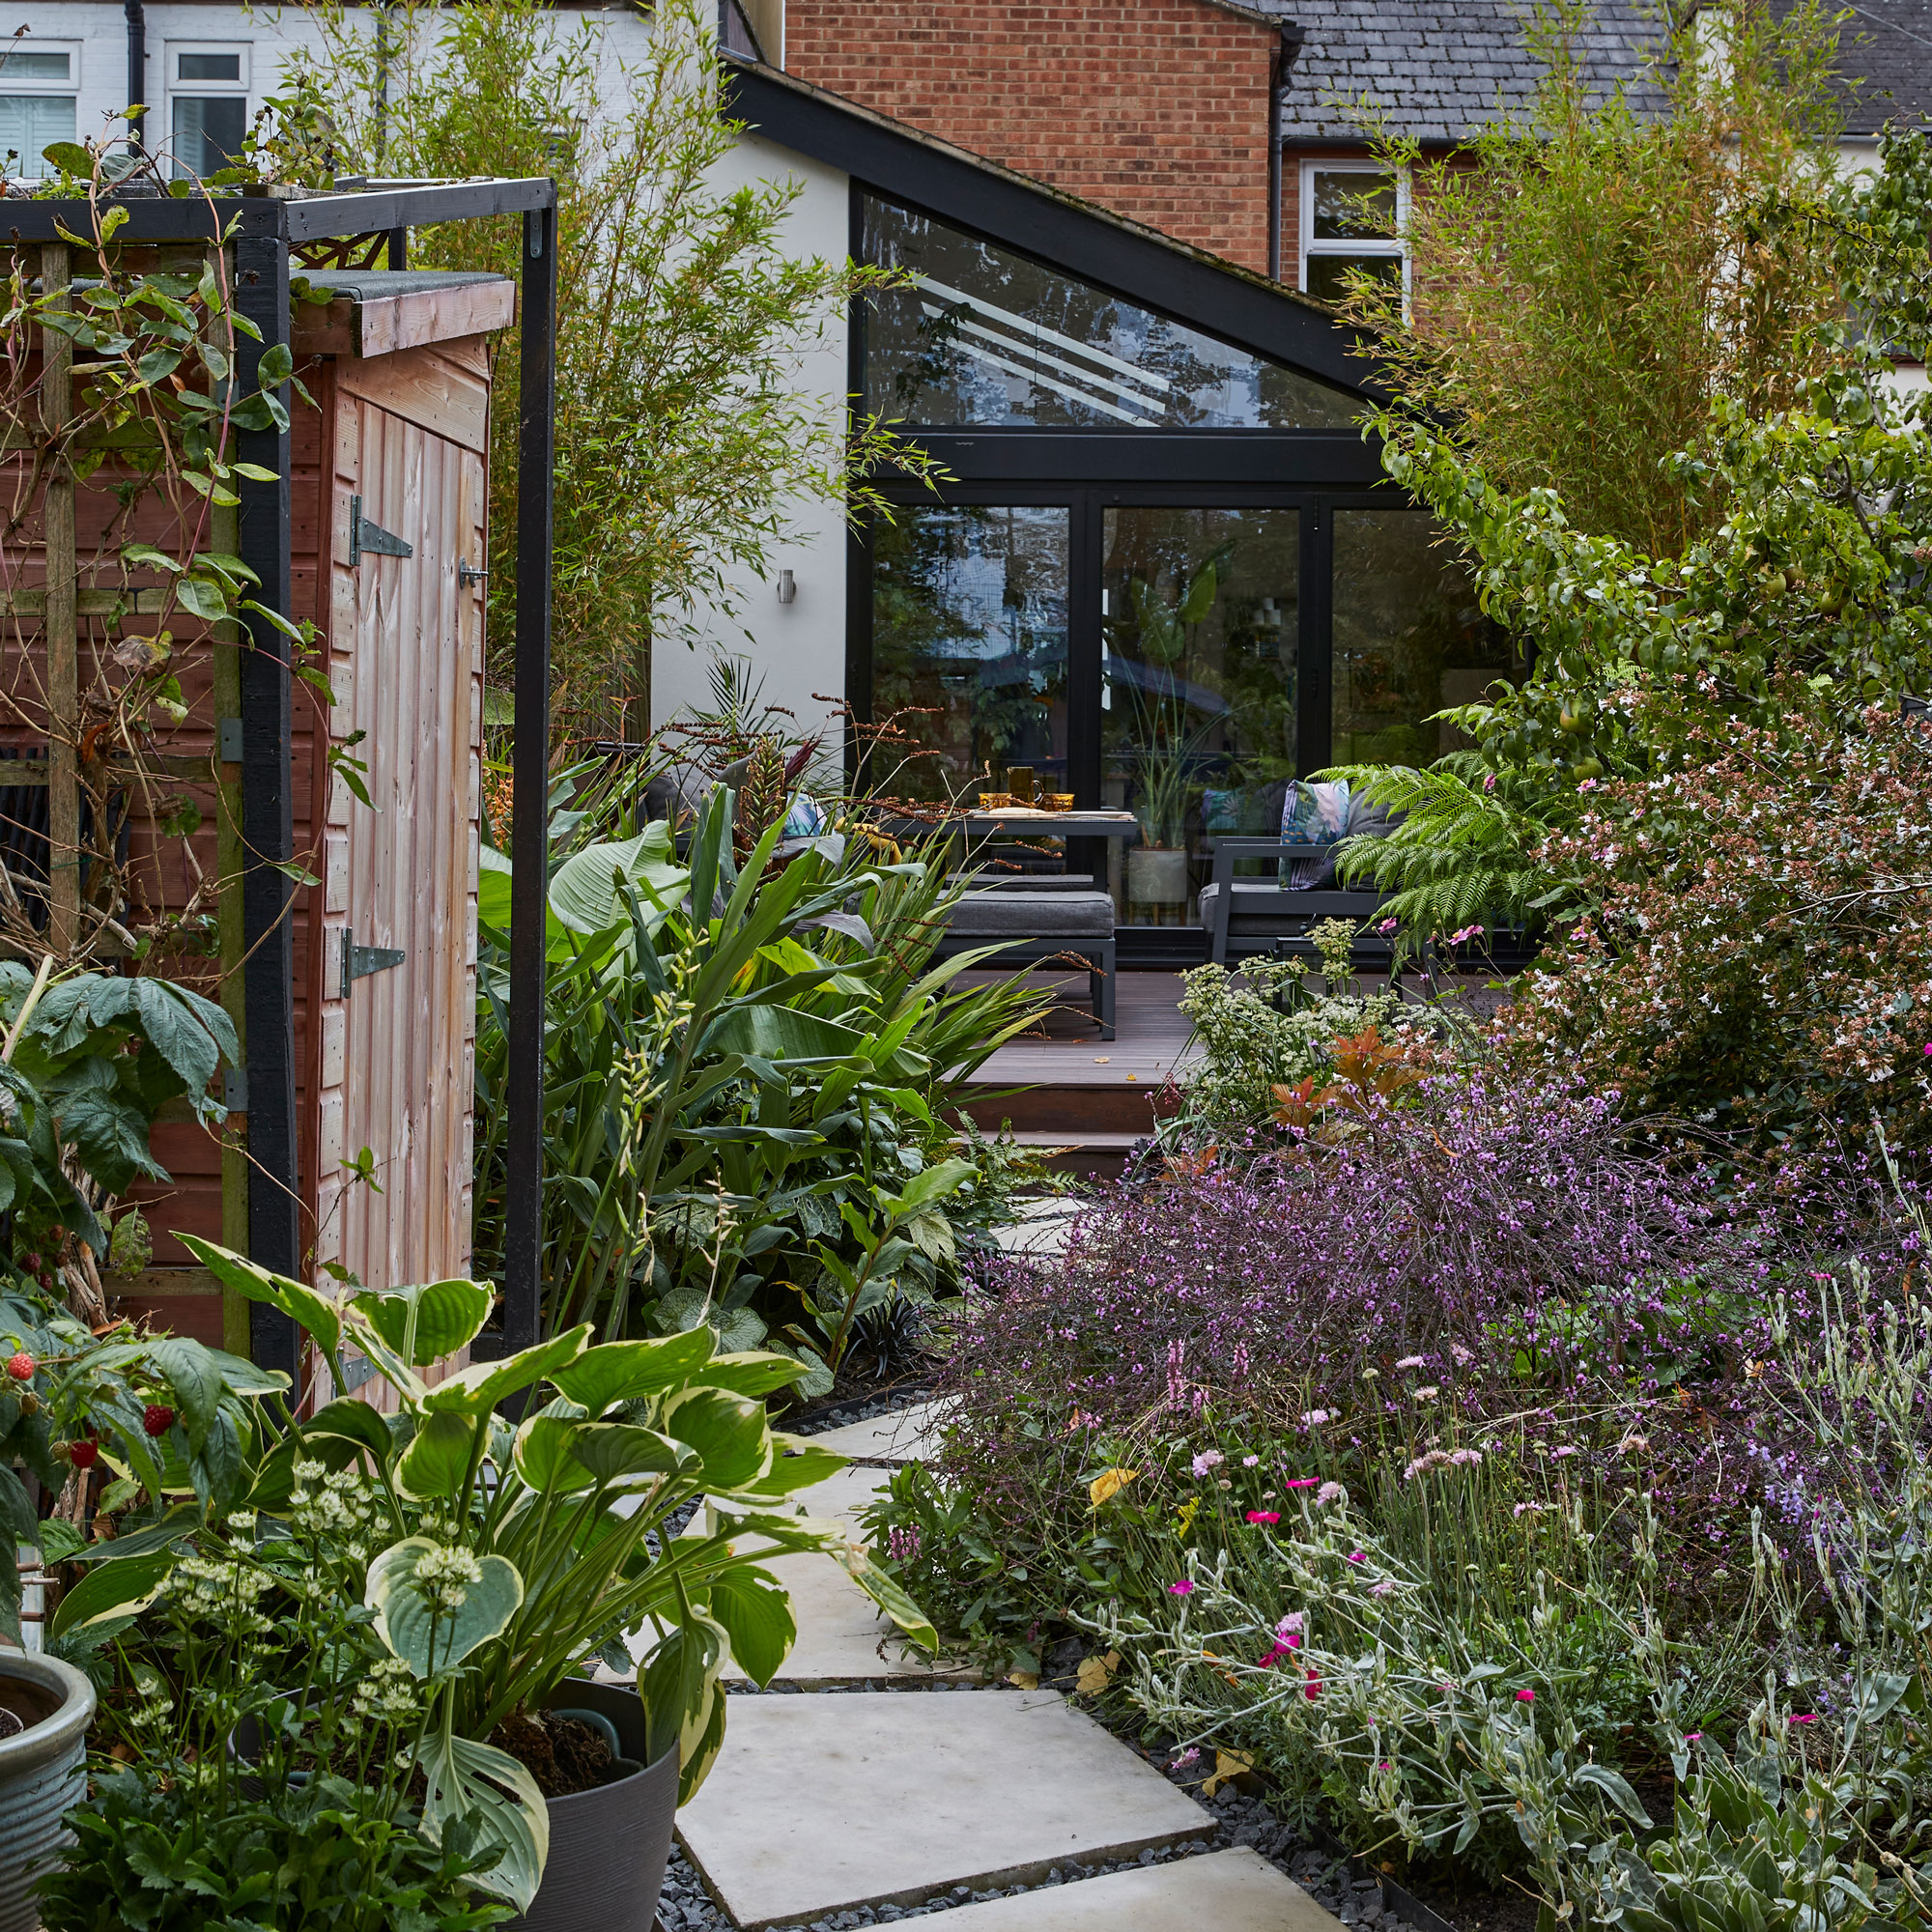 A bespoke zig-zag path leads the way into this colourful garden ...